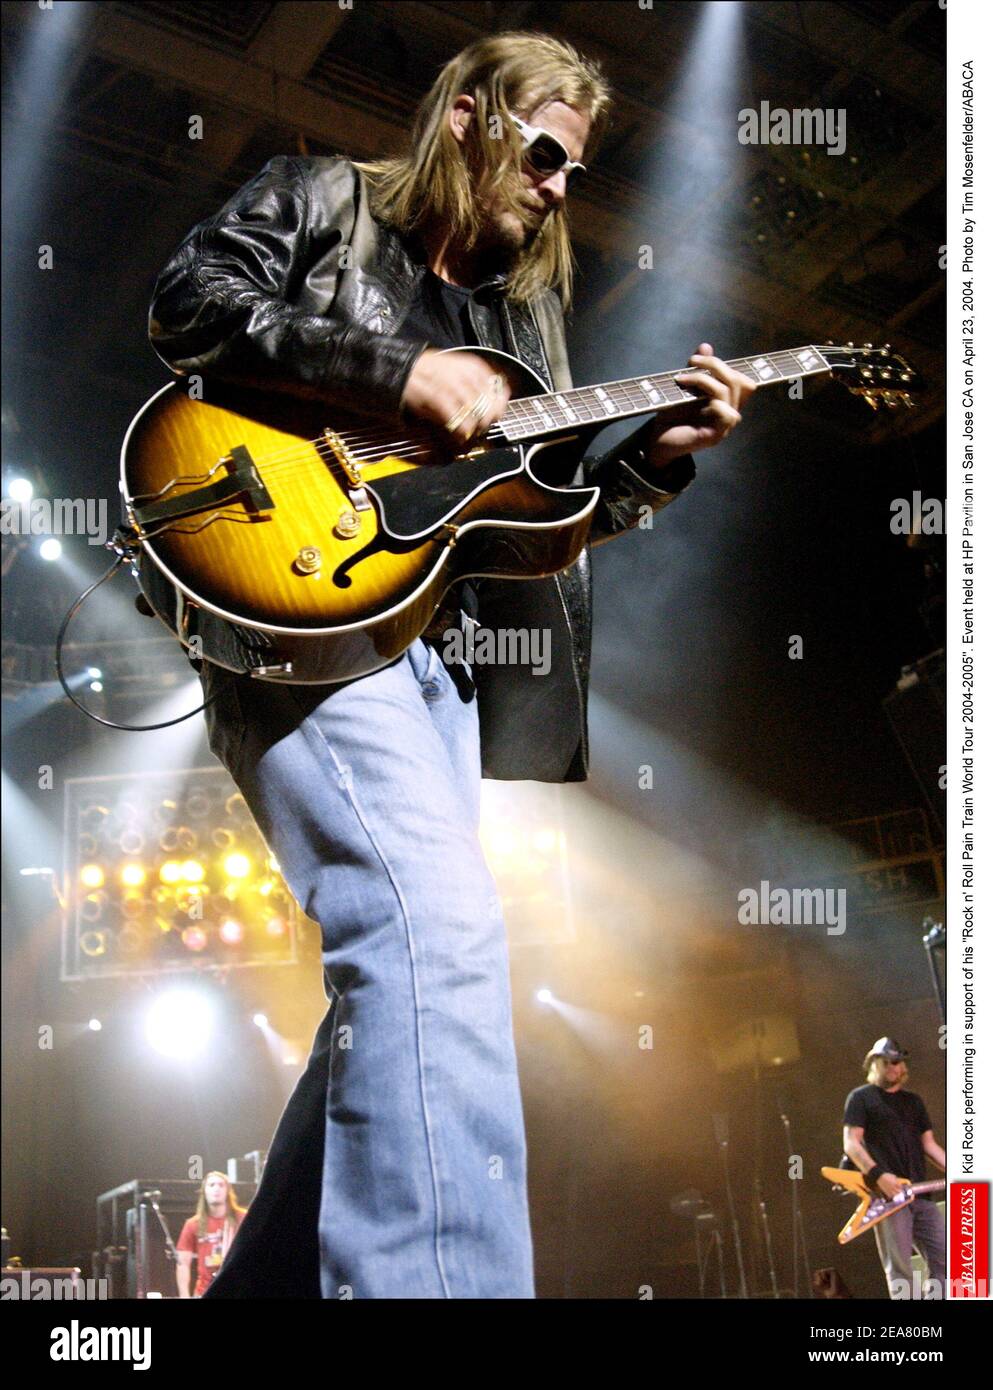 Kid Rock performing in support of his Rock n' Roll Pain Train World Tour 2004-2005. Event held at HP Pavilion in San Jose CA on April 23, 2004. Photo by Tim Mosenfelder/ABACA Stock Photo